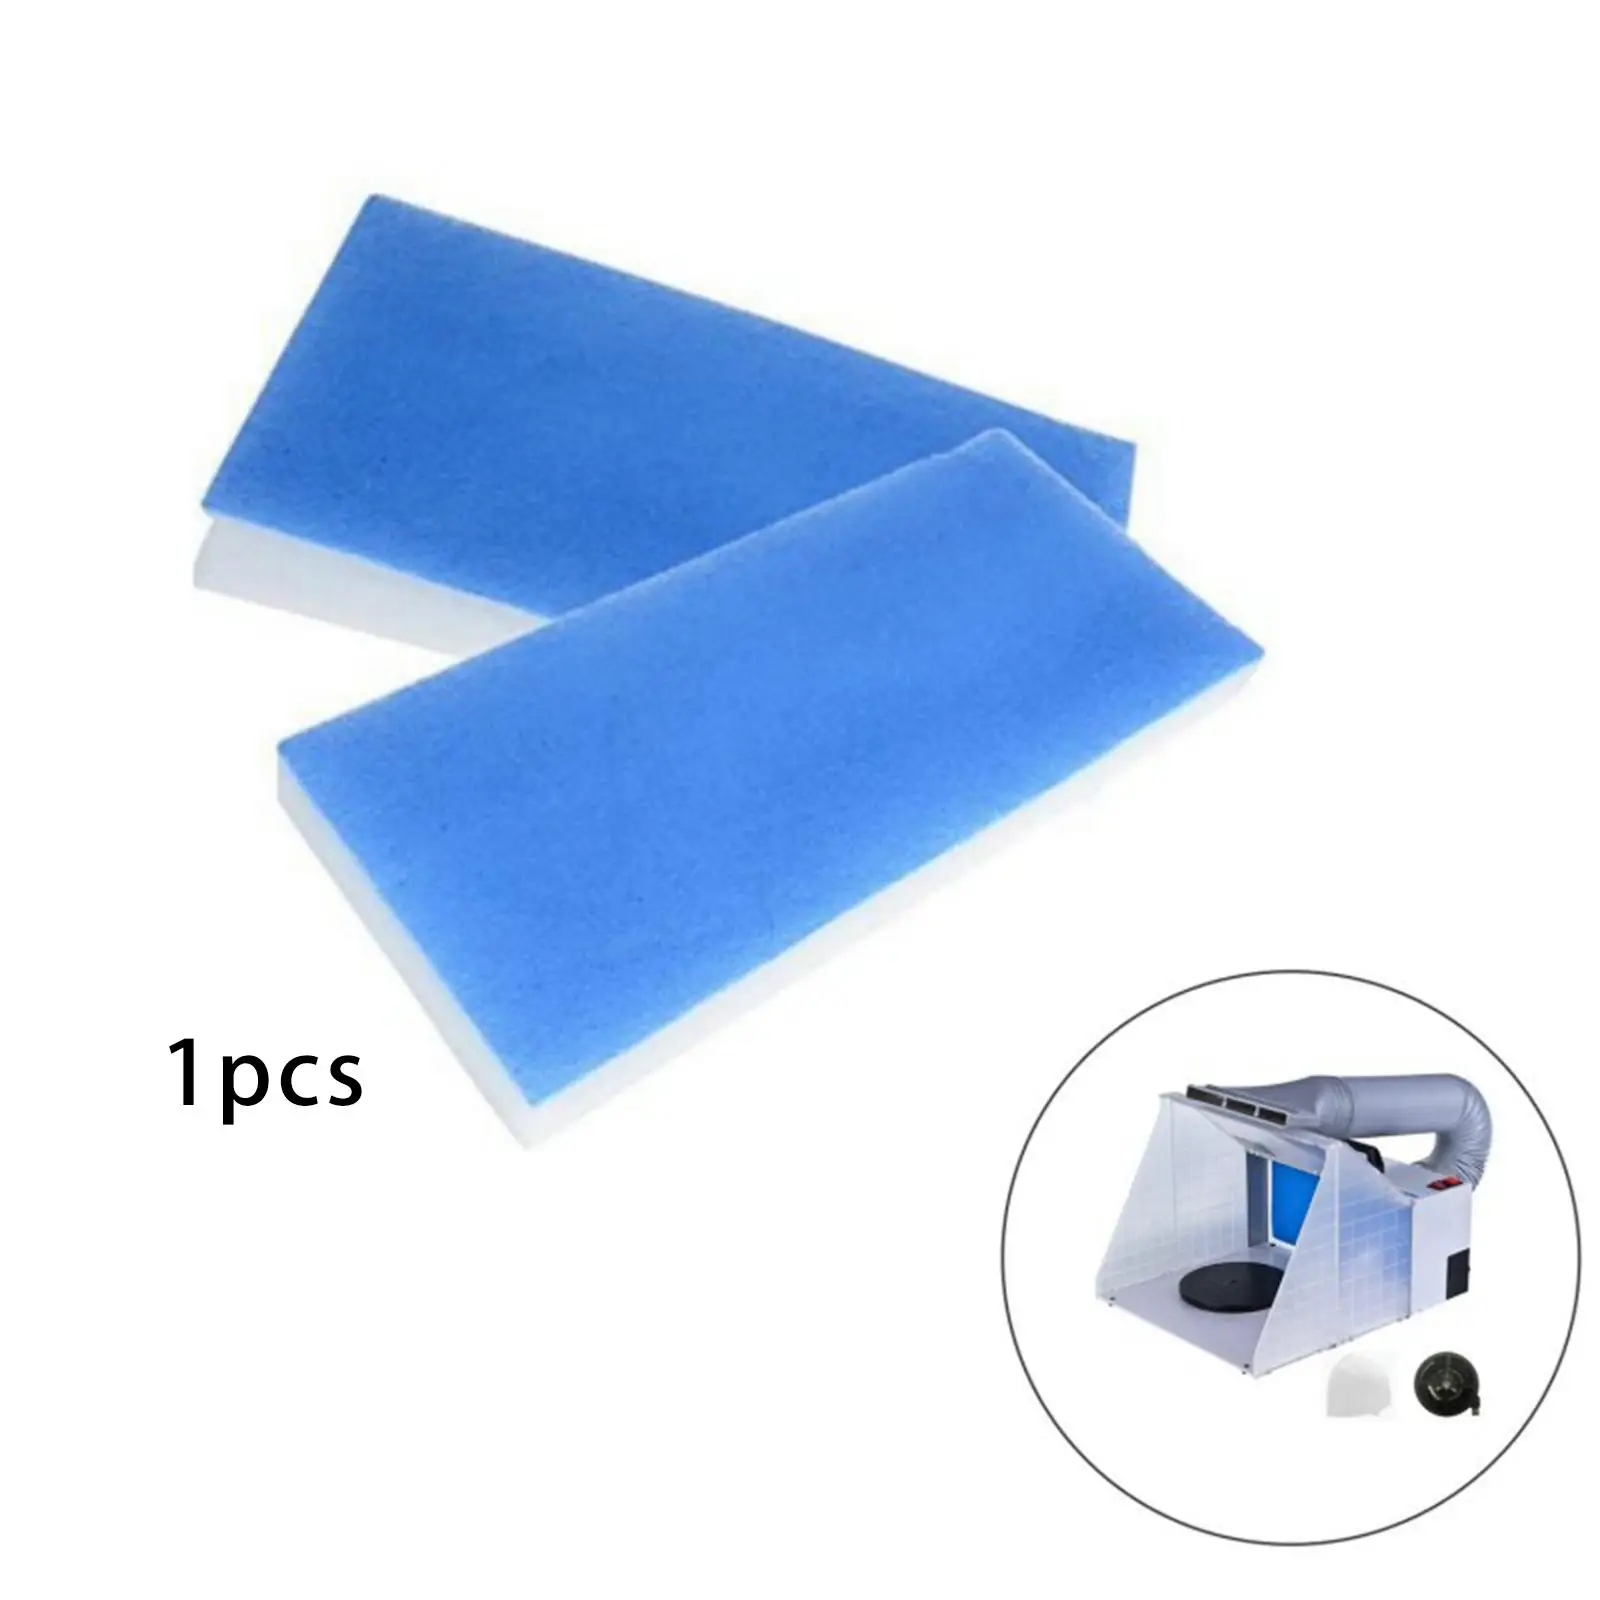 1 Piece Spray Booth Filter Fiberglass Easy to Clean Practical Tool Filter Pad Replaceable Durable for Sky Enterprise, Airhobby